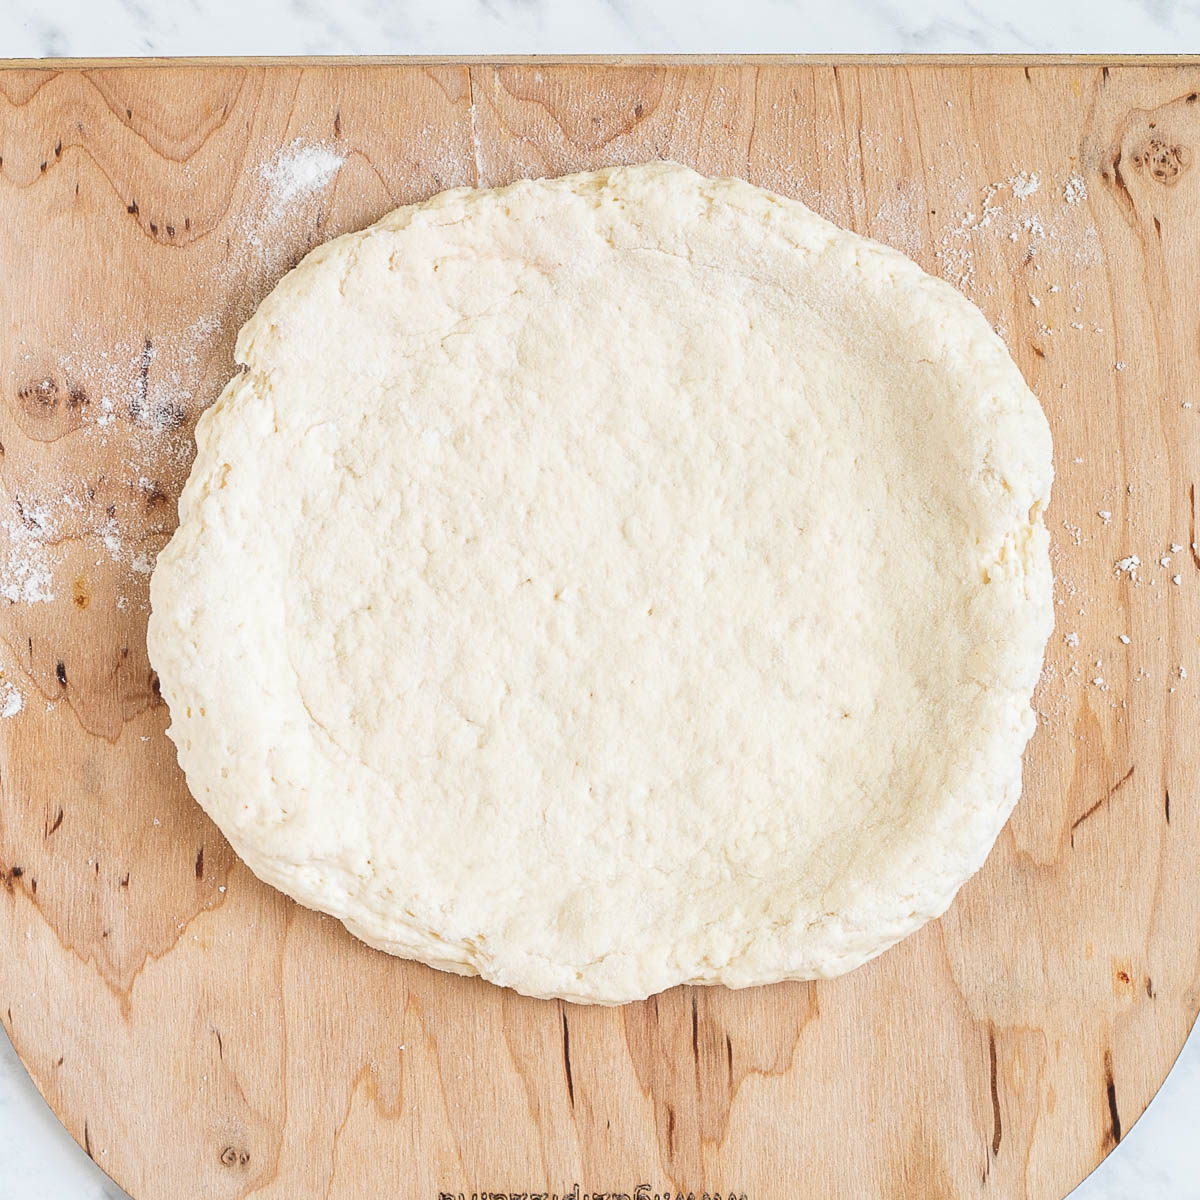 A pizza-shaped dough on a wooden pizza peel.